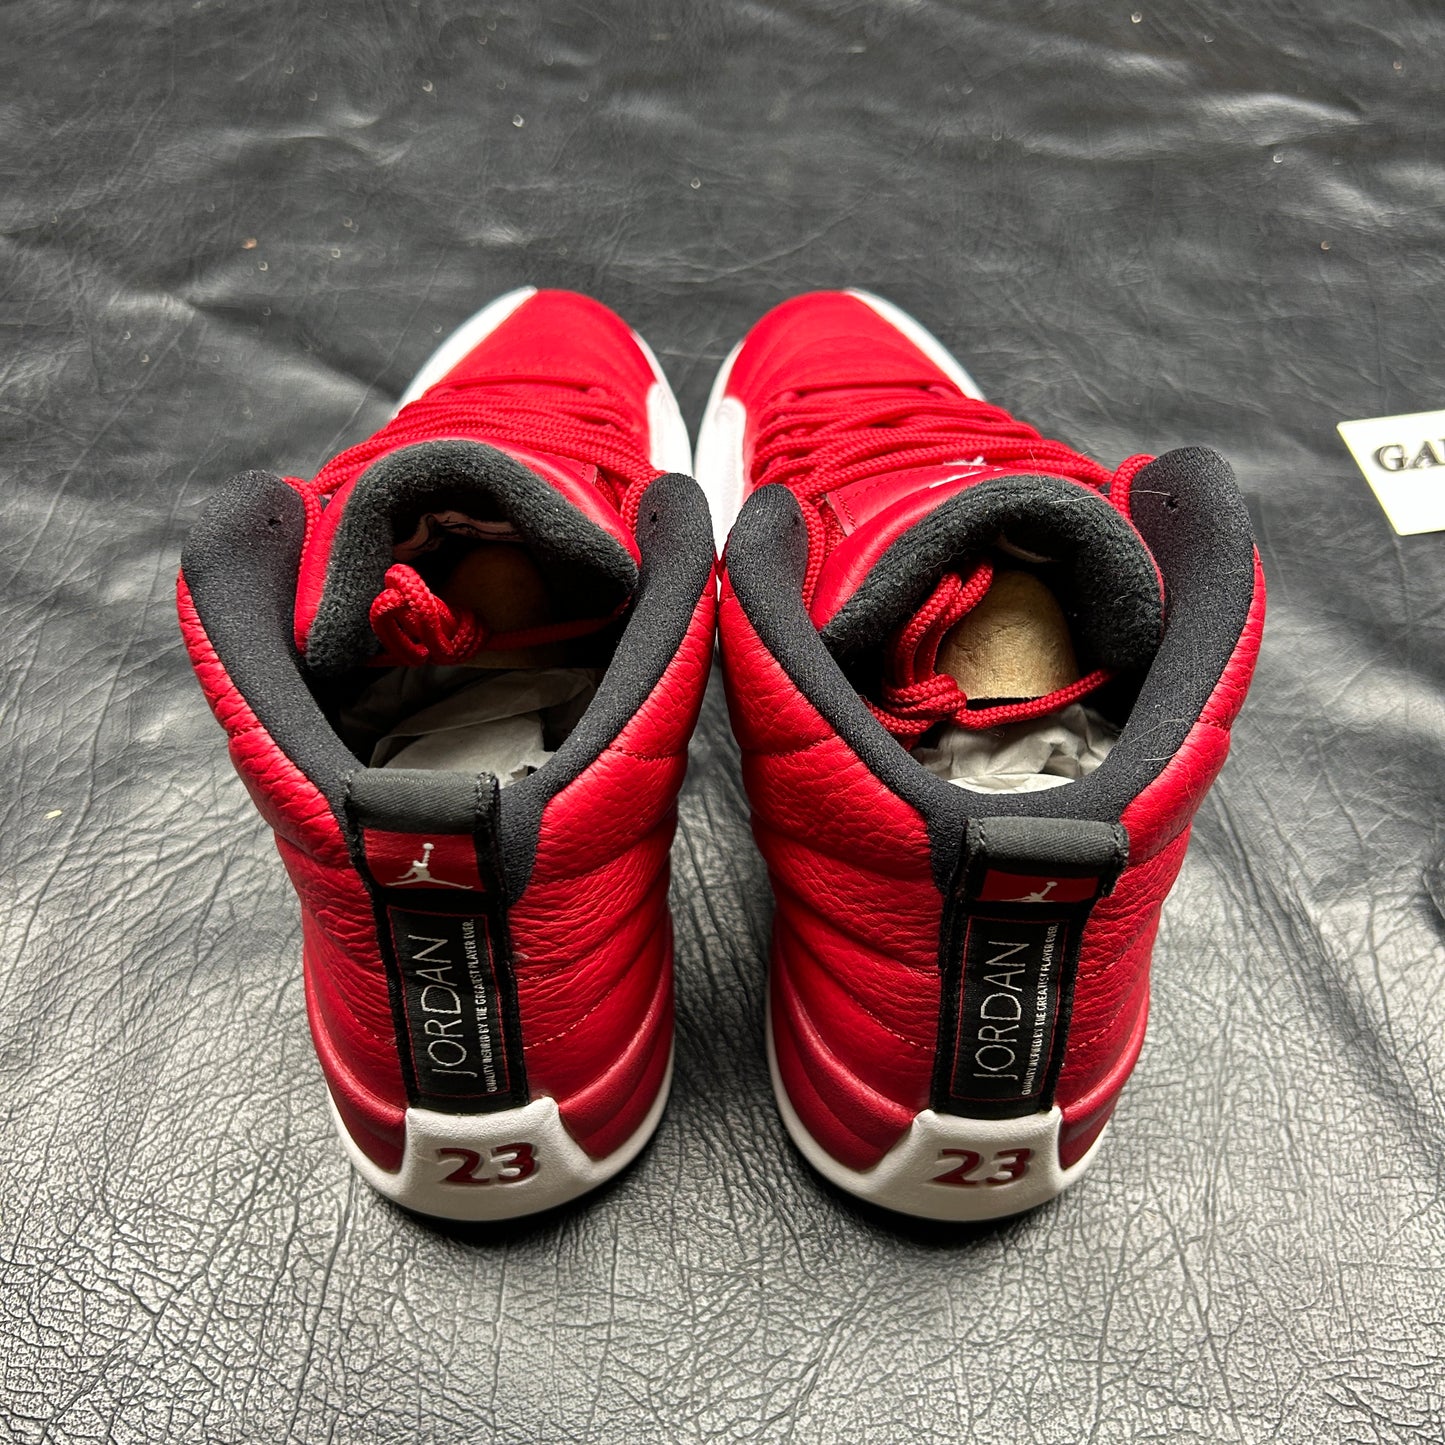 Jordan 12 Retro Gym Red (Pre-Owned) Size 8.5